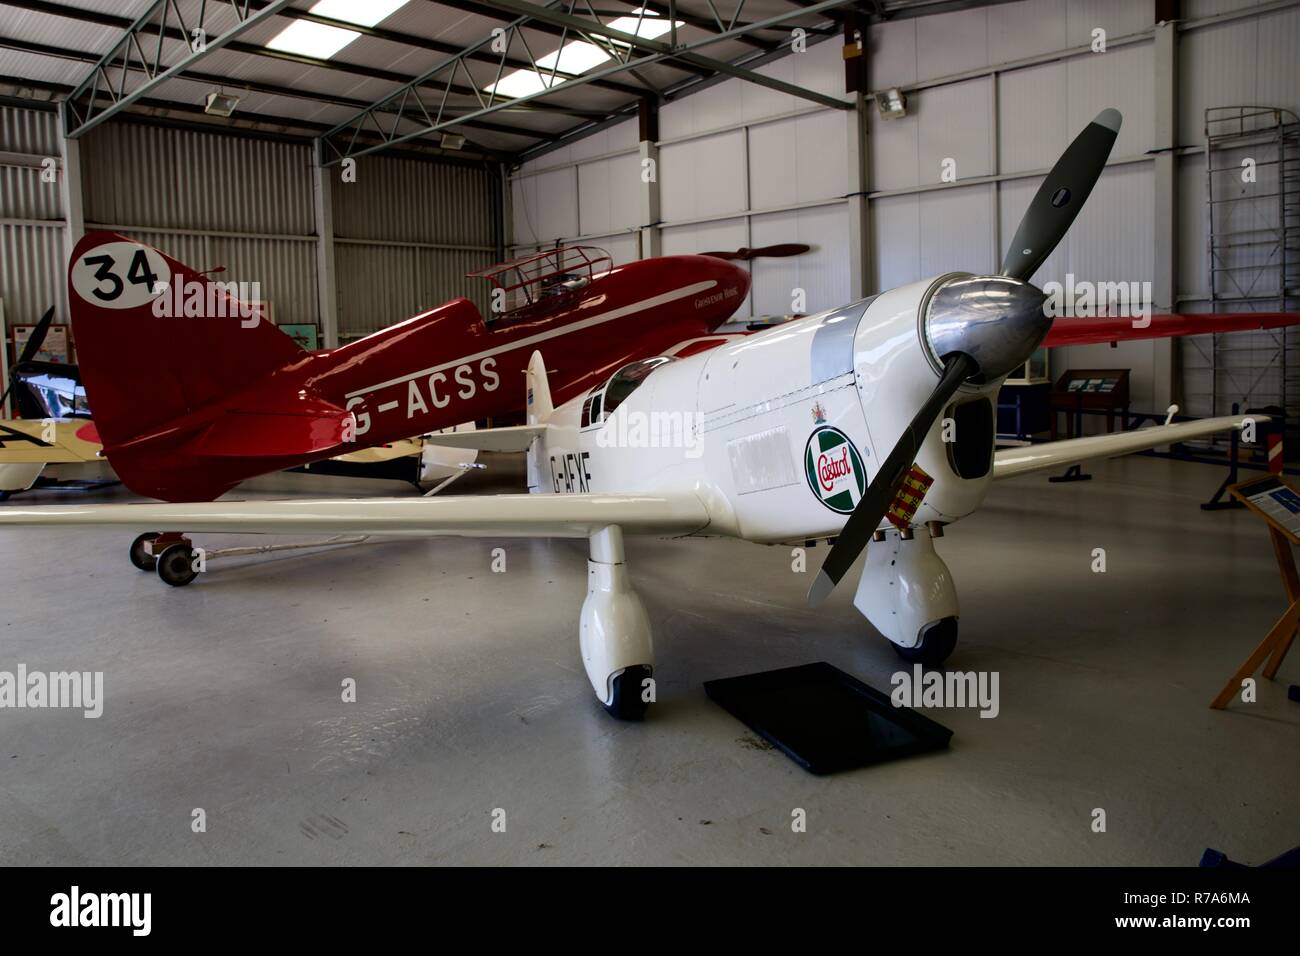 DH88 Comet (G-ACSS) and Percival Mew Gull (G-AEXF) on display in a aircraft hangar at Shuttleworth Stock Photo